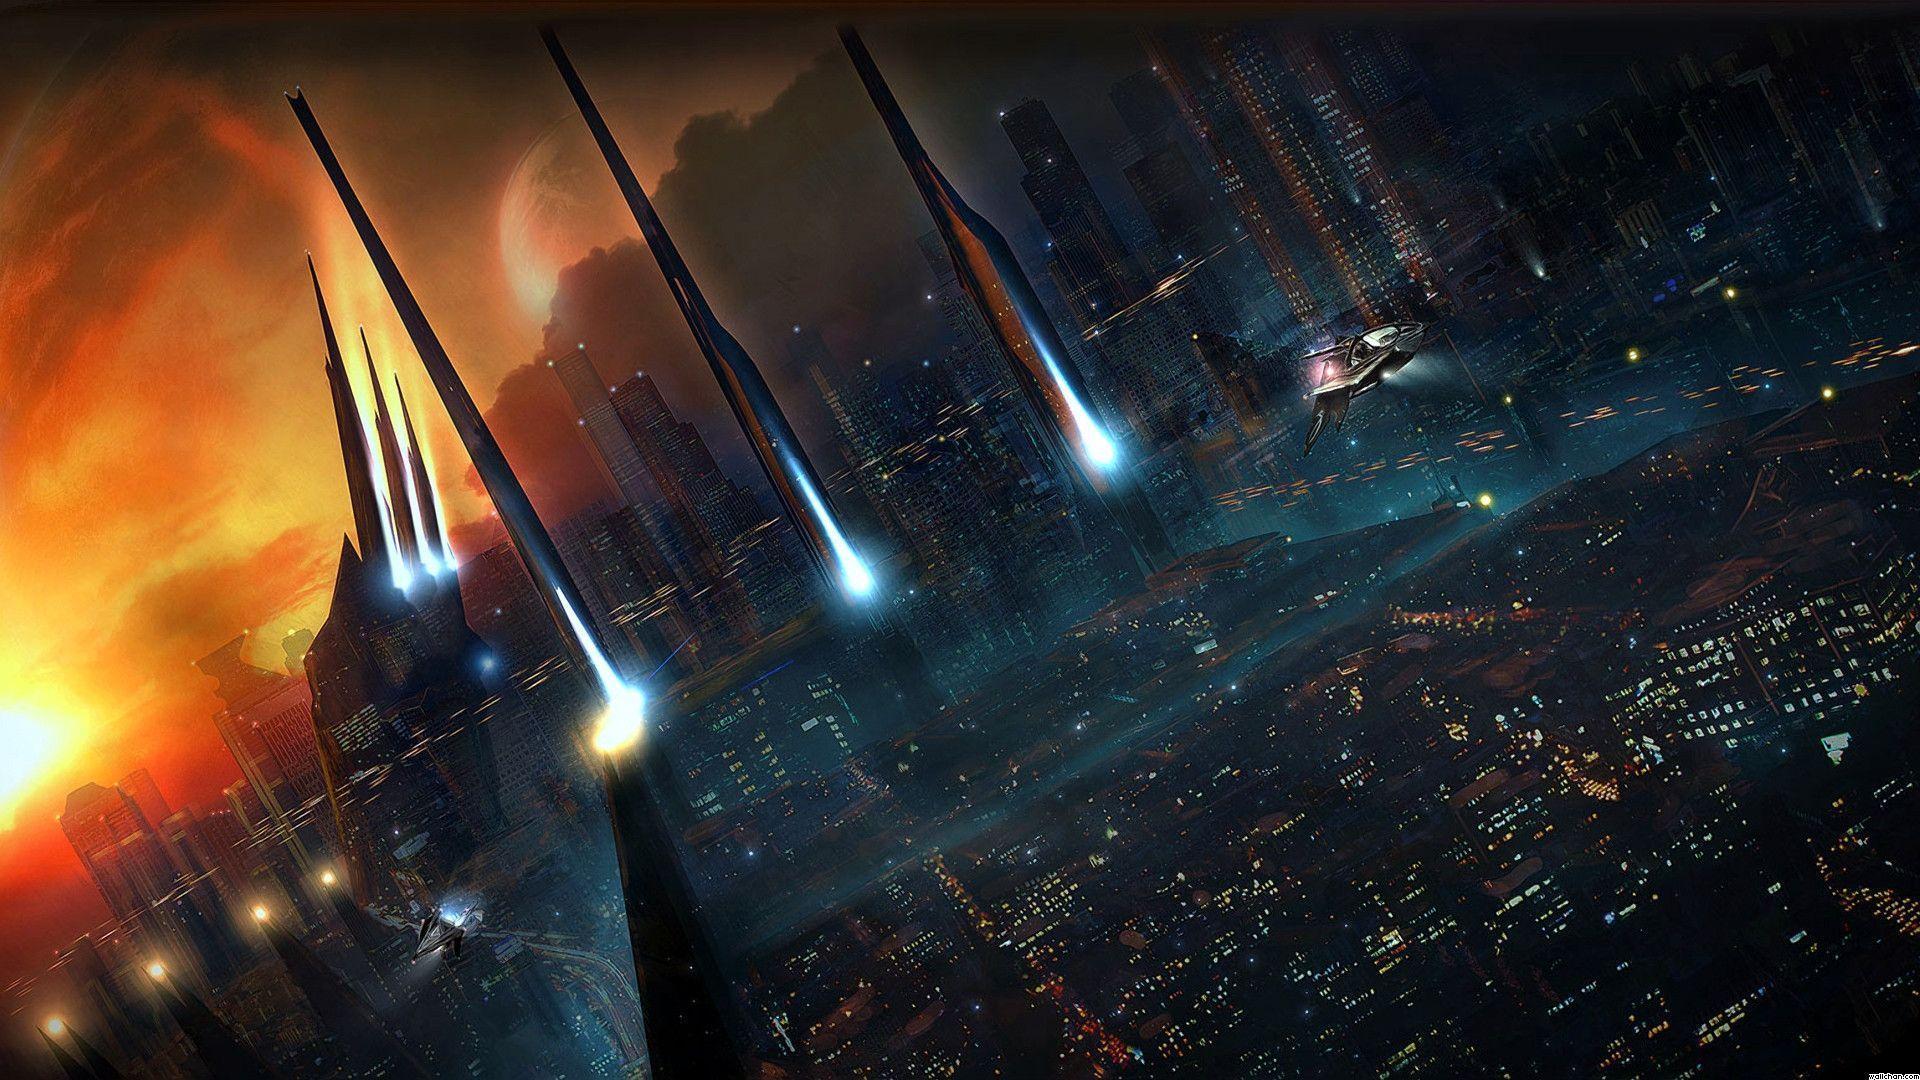 Futuristic Epic Space Wallpapers